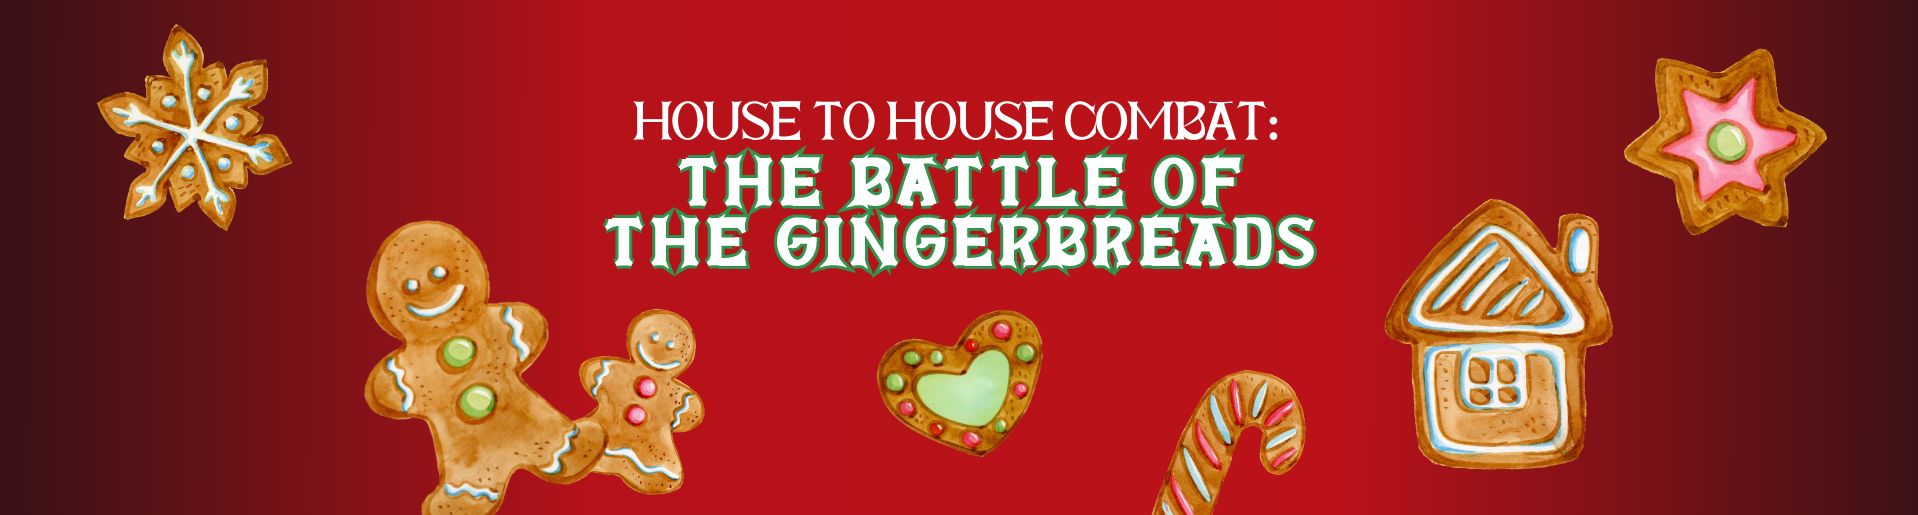 House to House Combat: Battle of the Gingerbreads